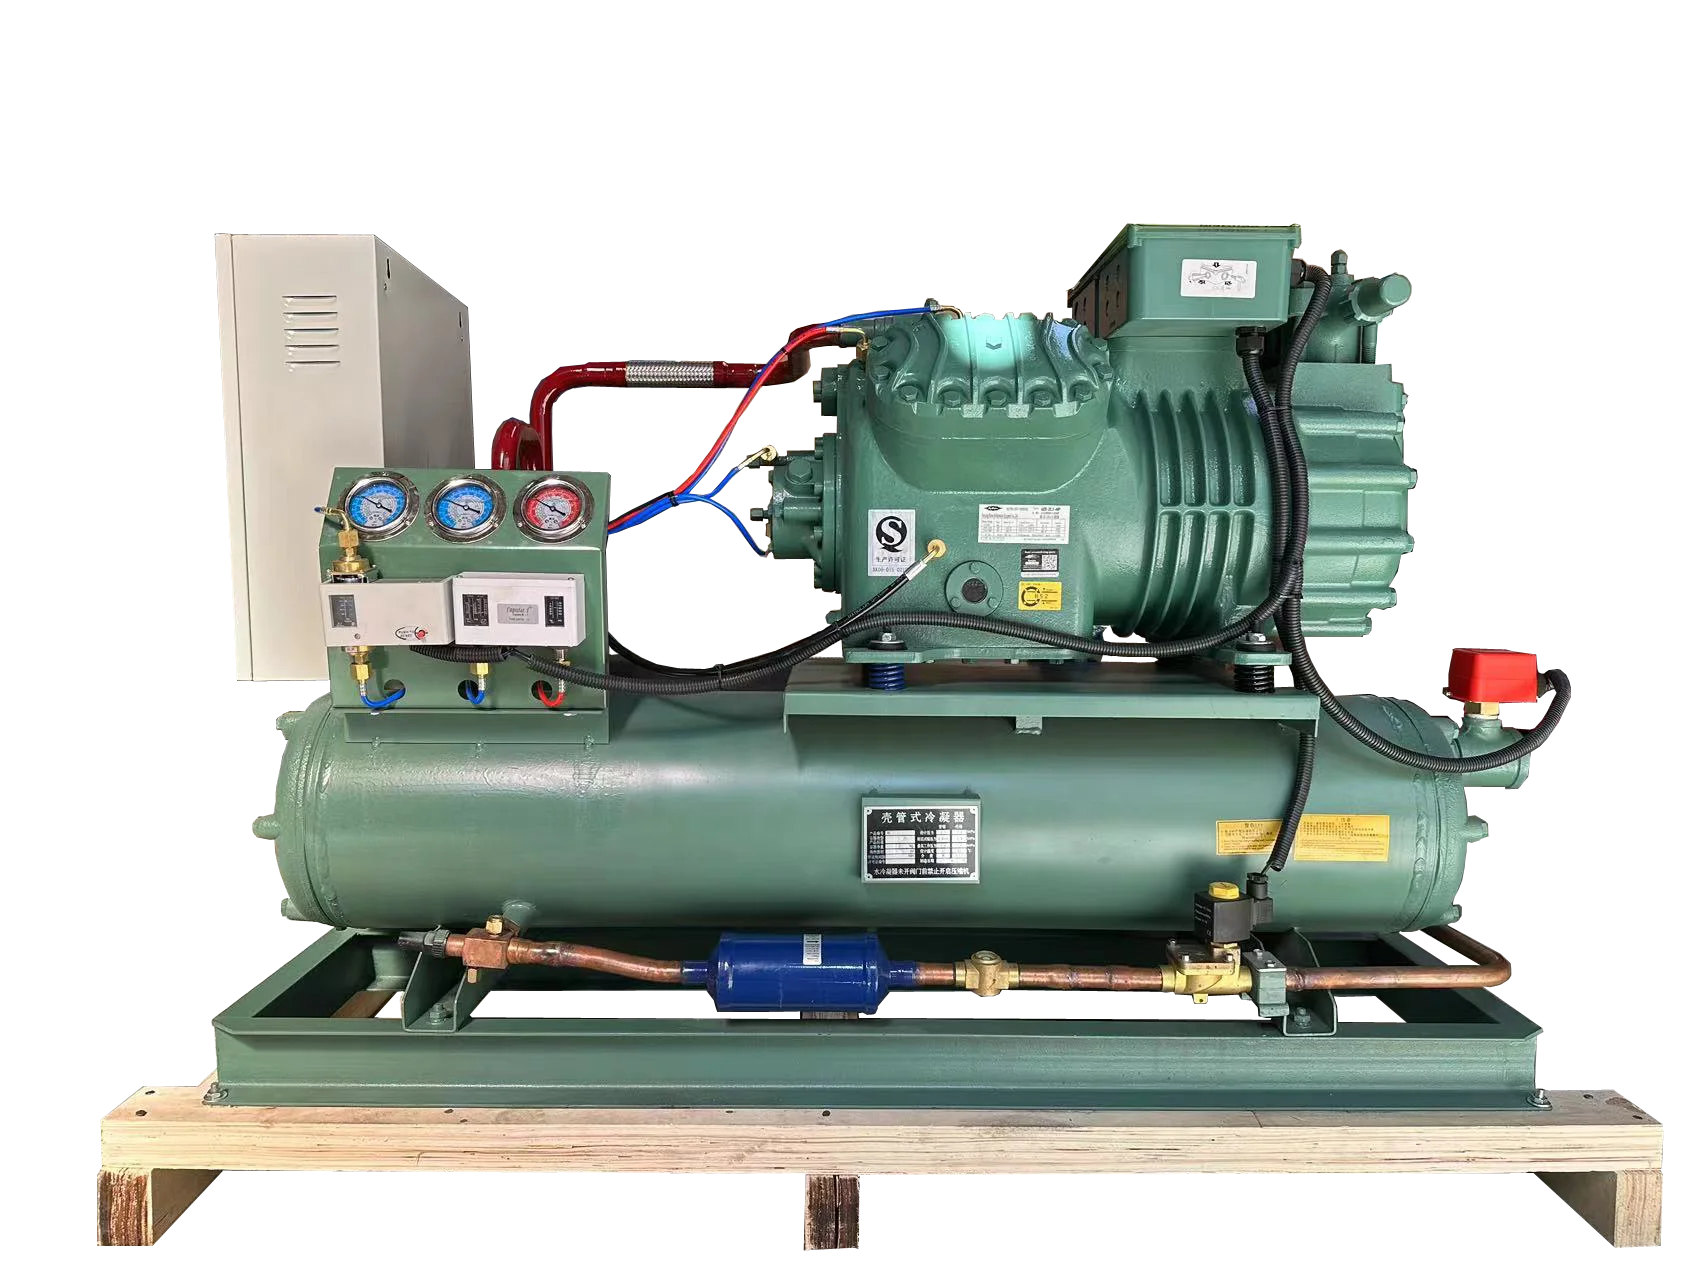 How much do you know about water chiller unit?